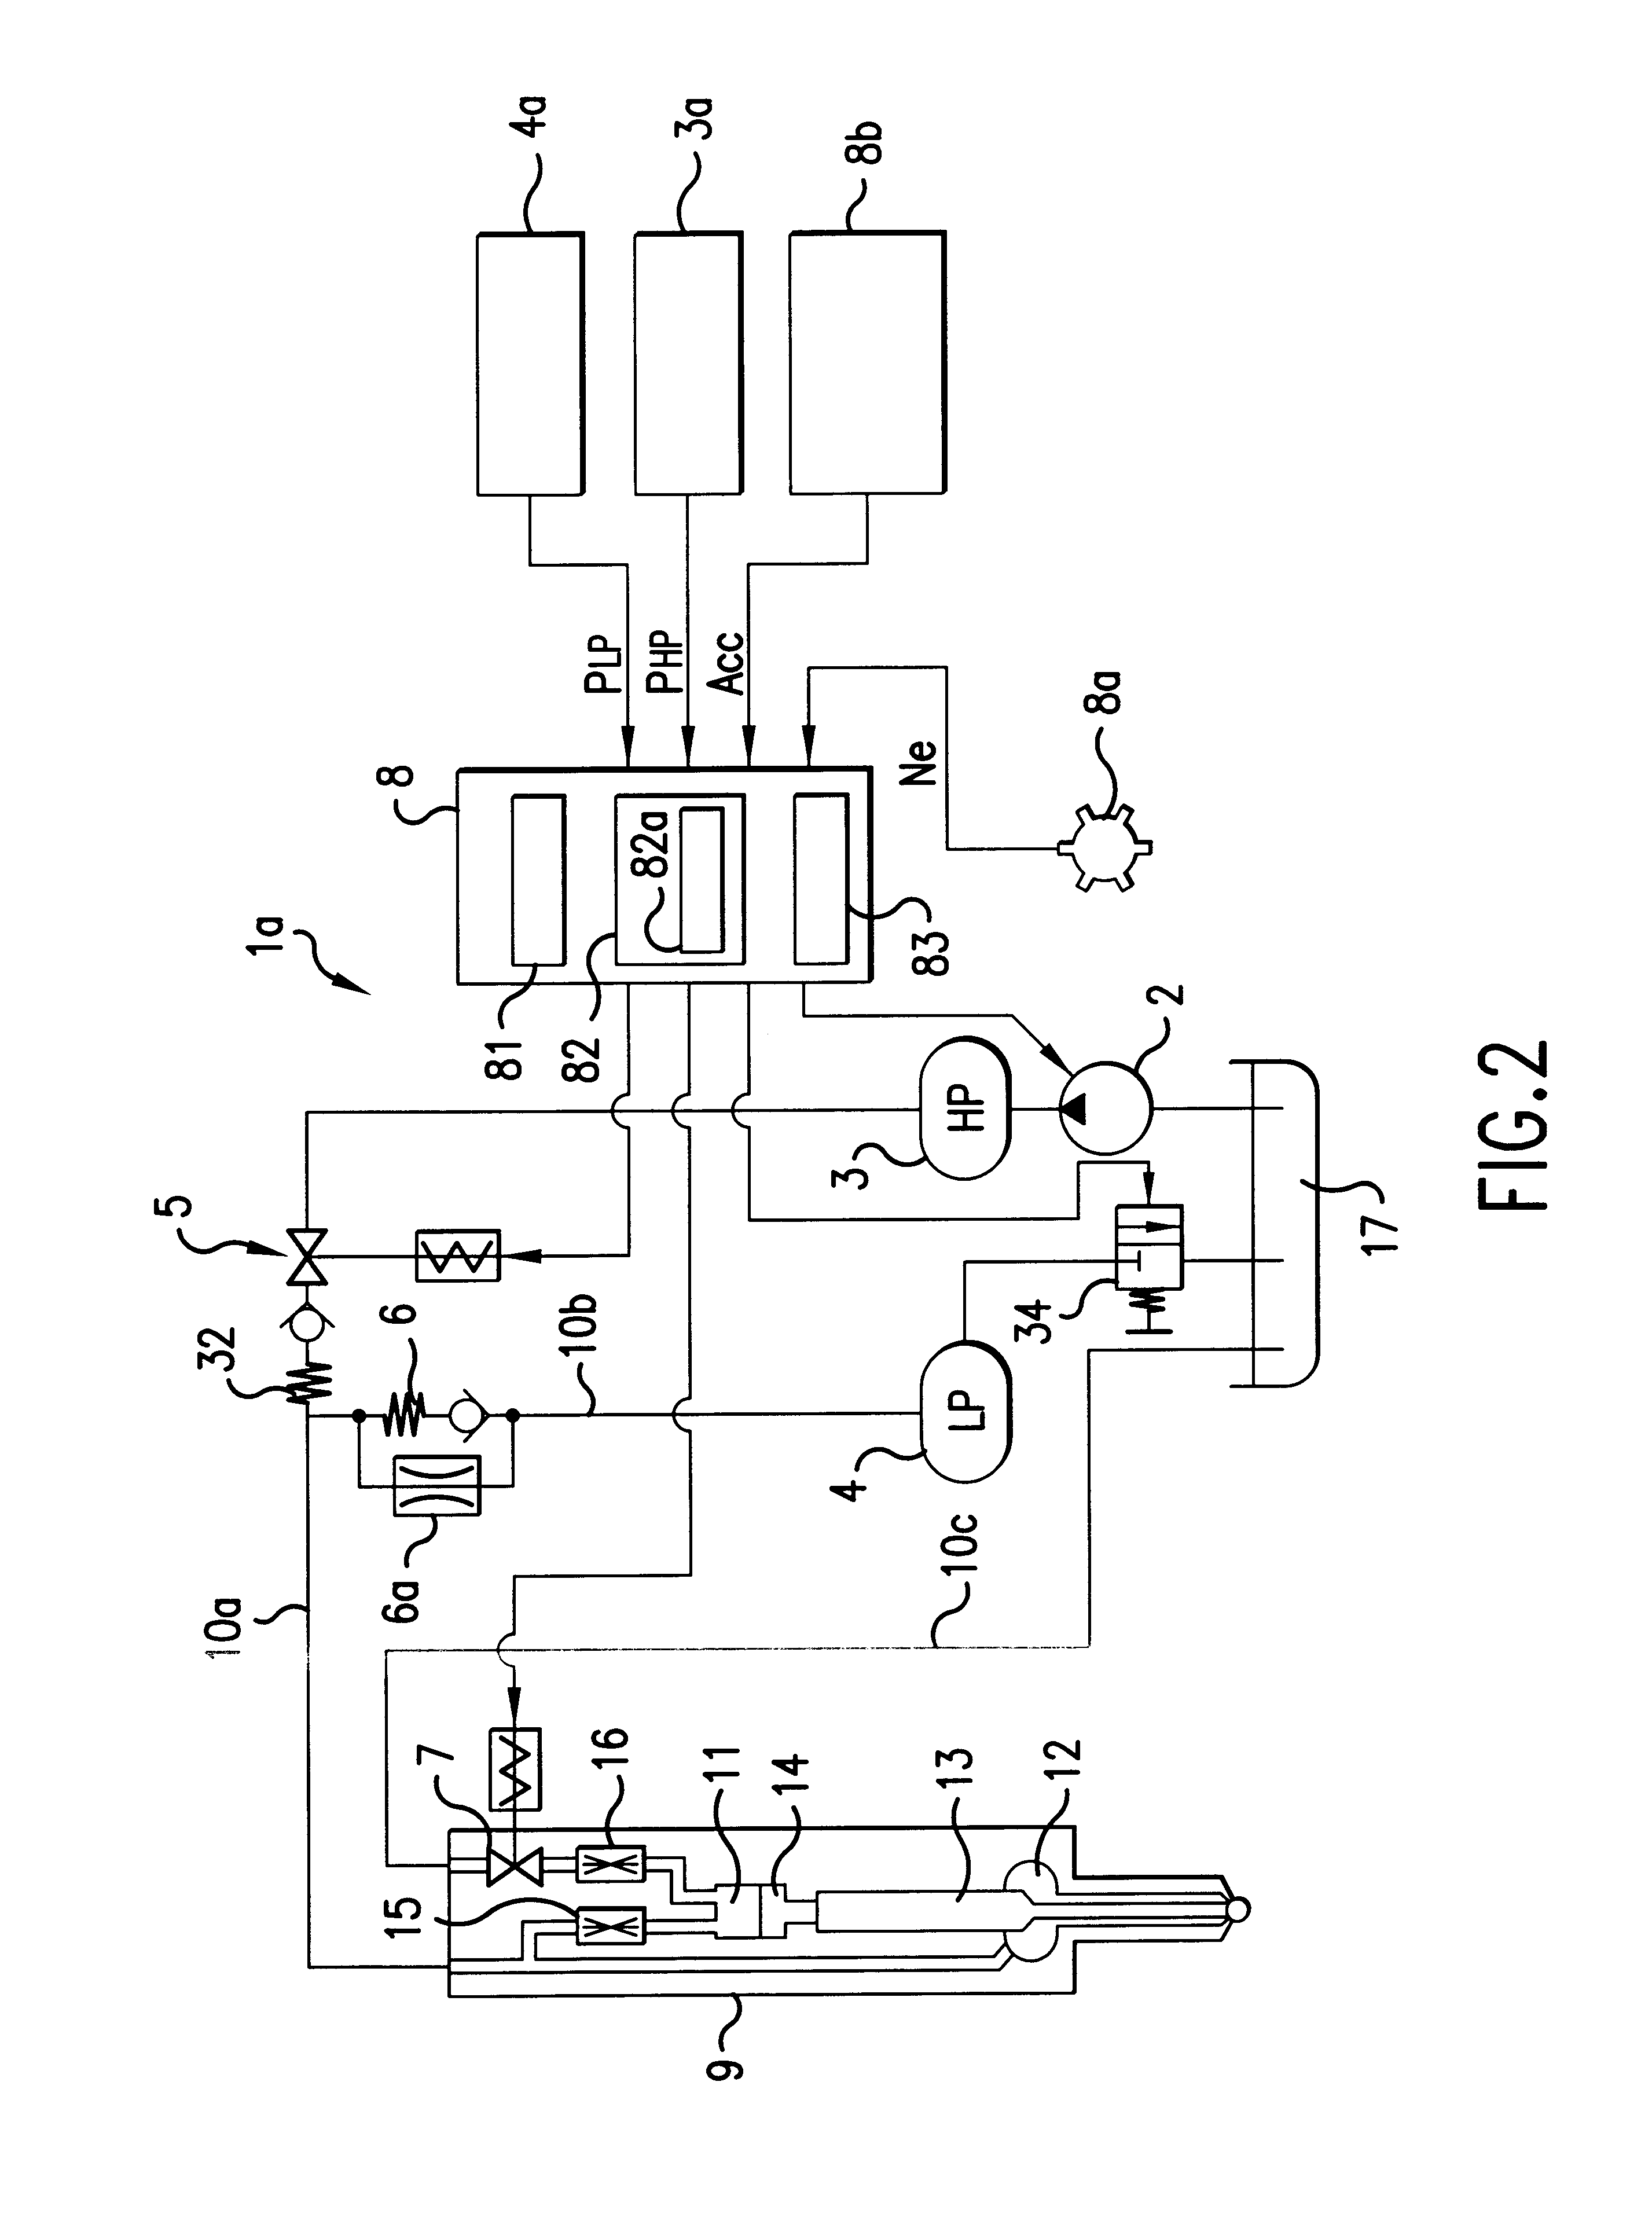 Accumulator fuel injection system